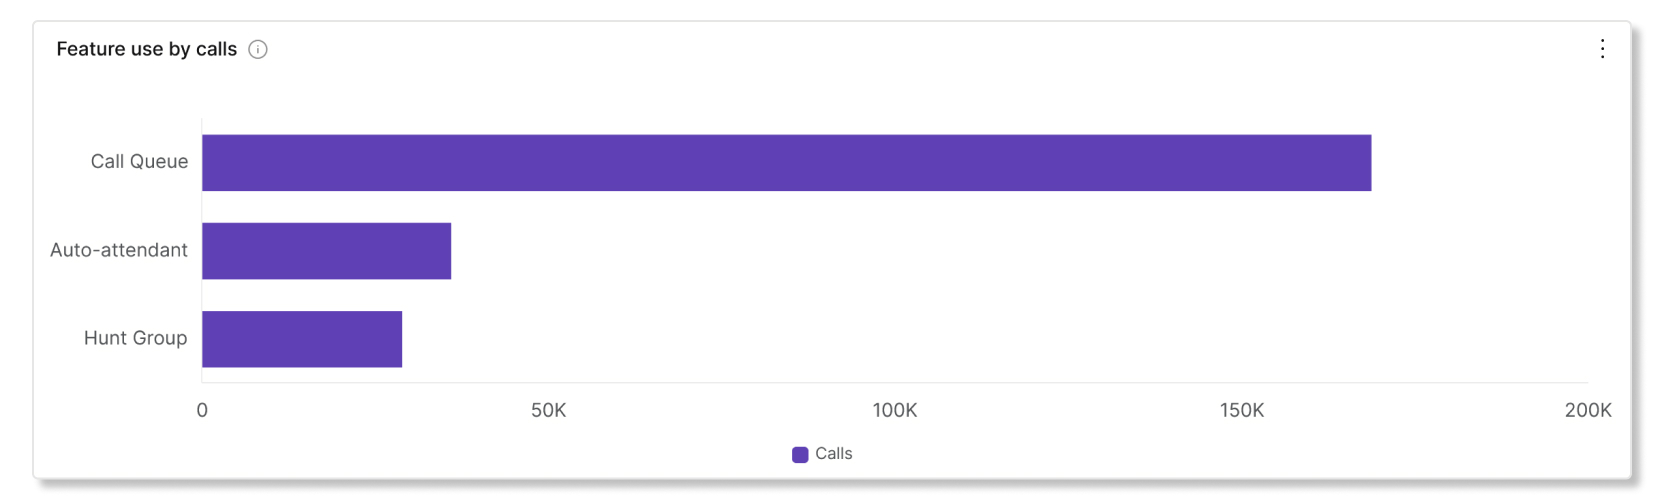 Feature use by calls chart in Partner Hub calling engagement analytics